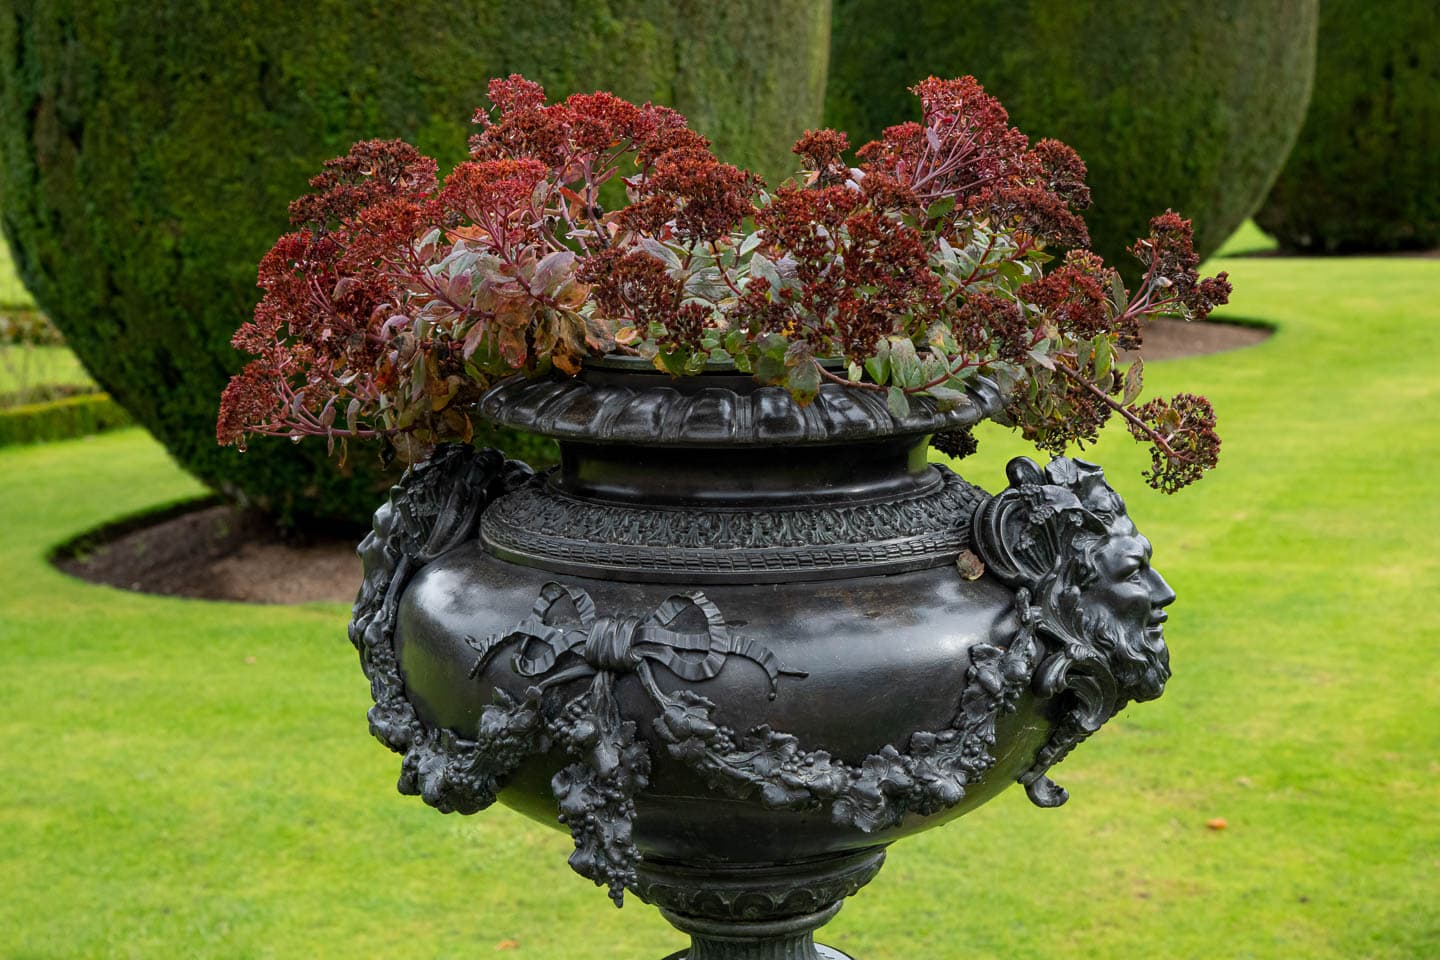 A large black urn with red flowers